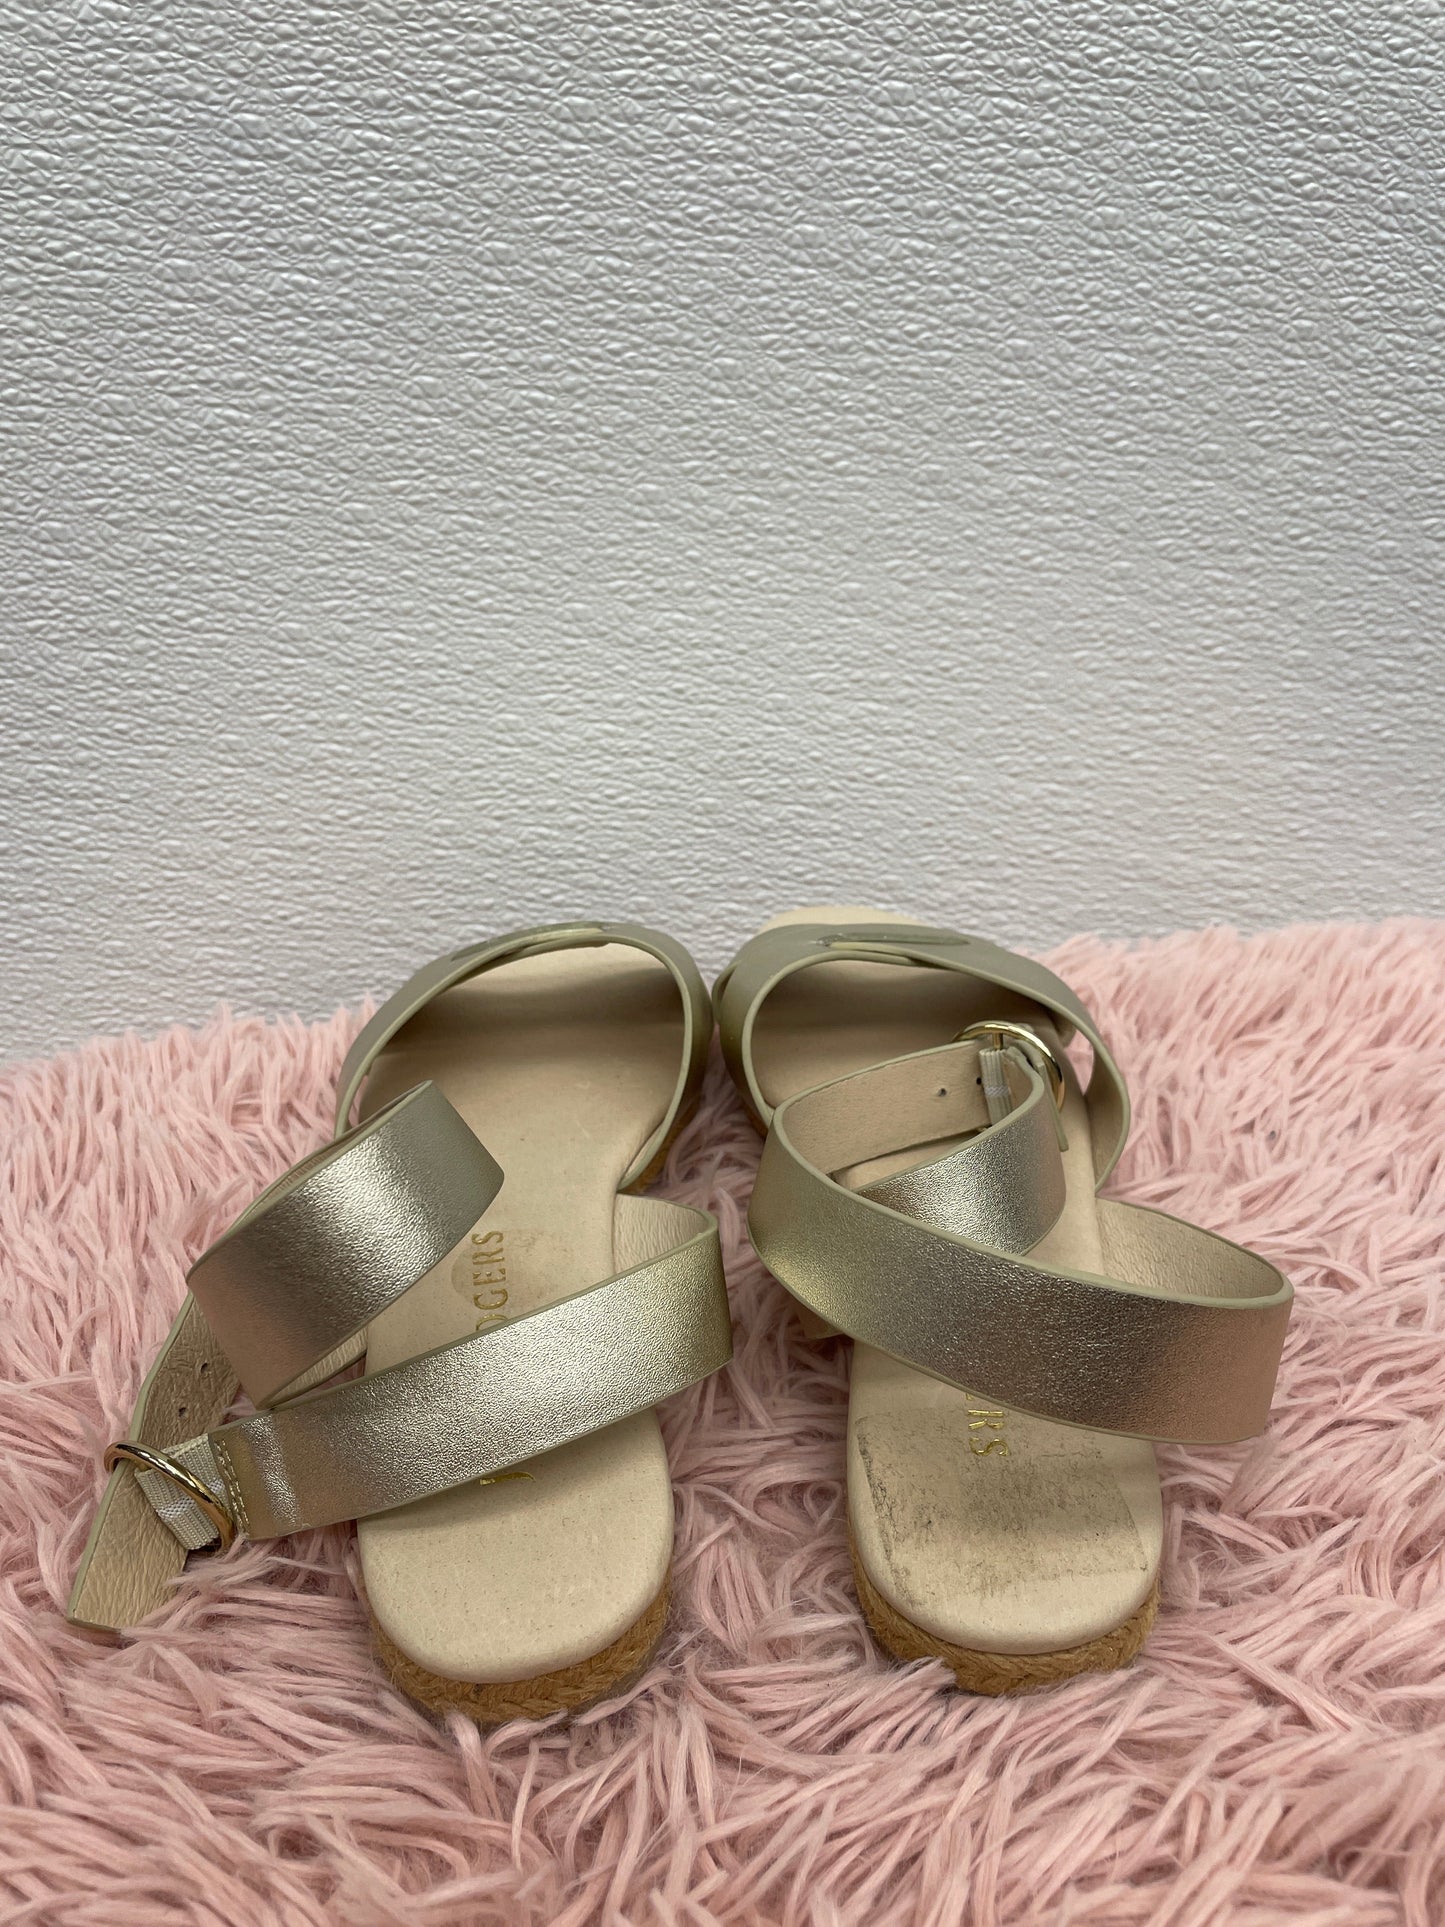 Sandals Flats By Jack Rogers  Size: 7.5